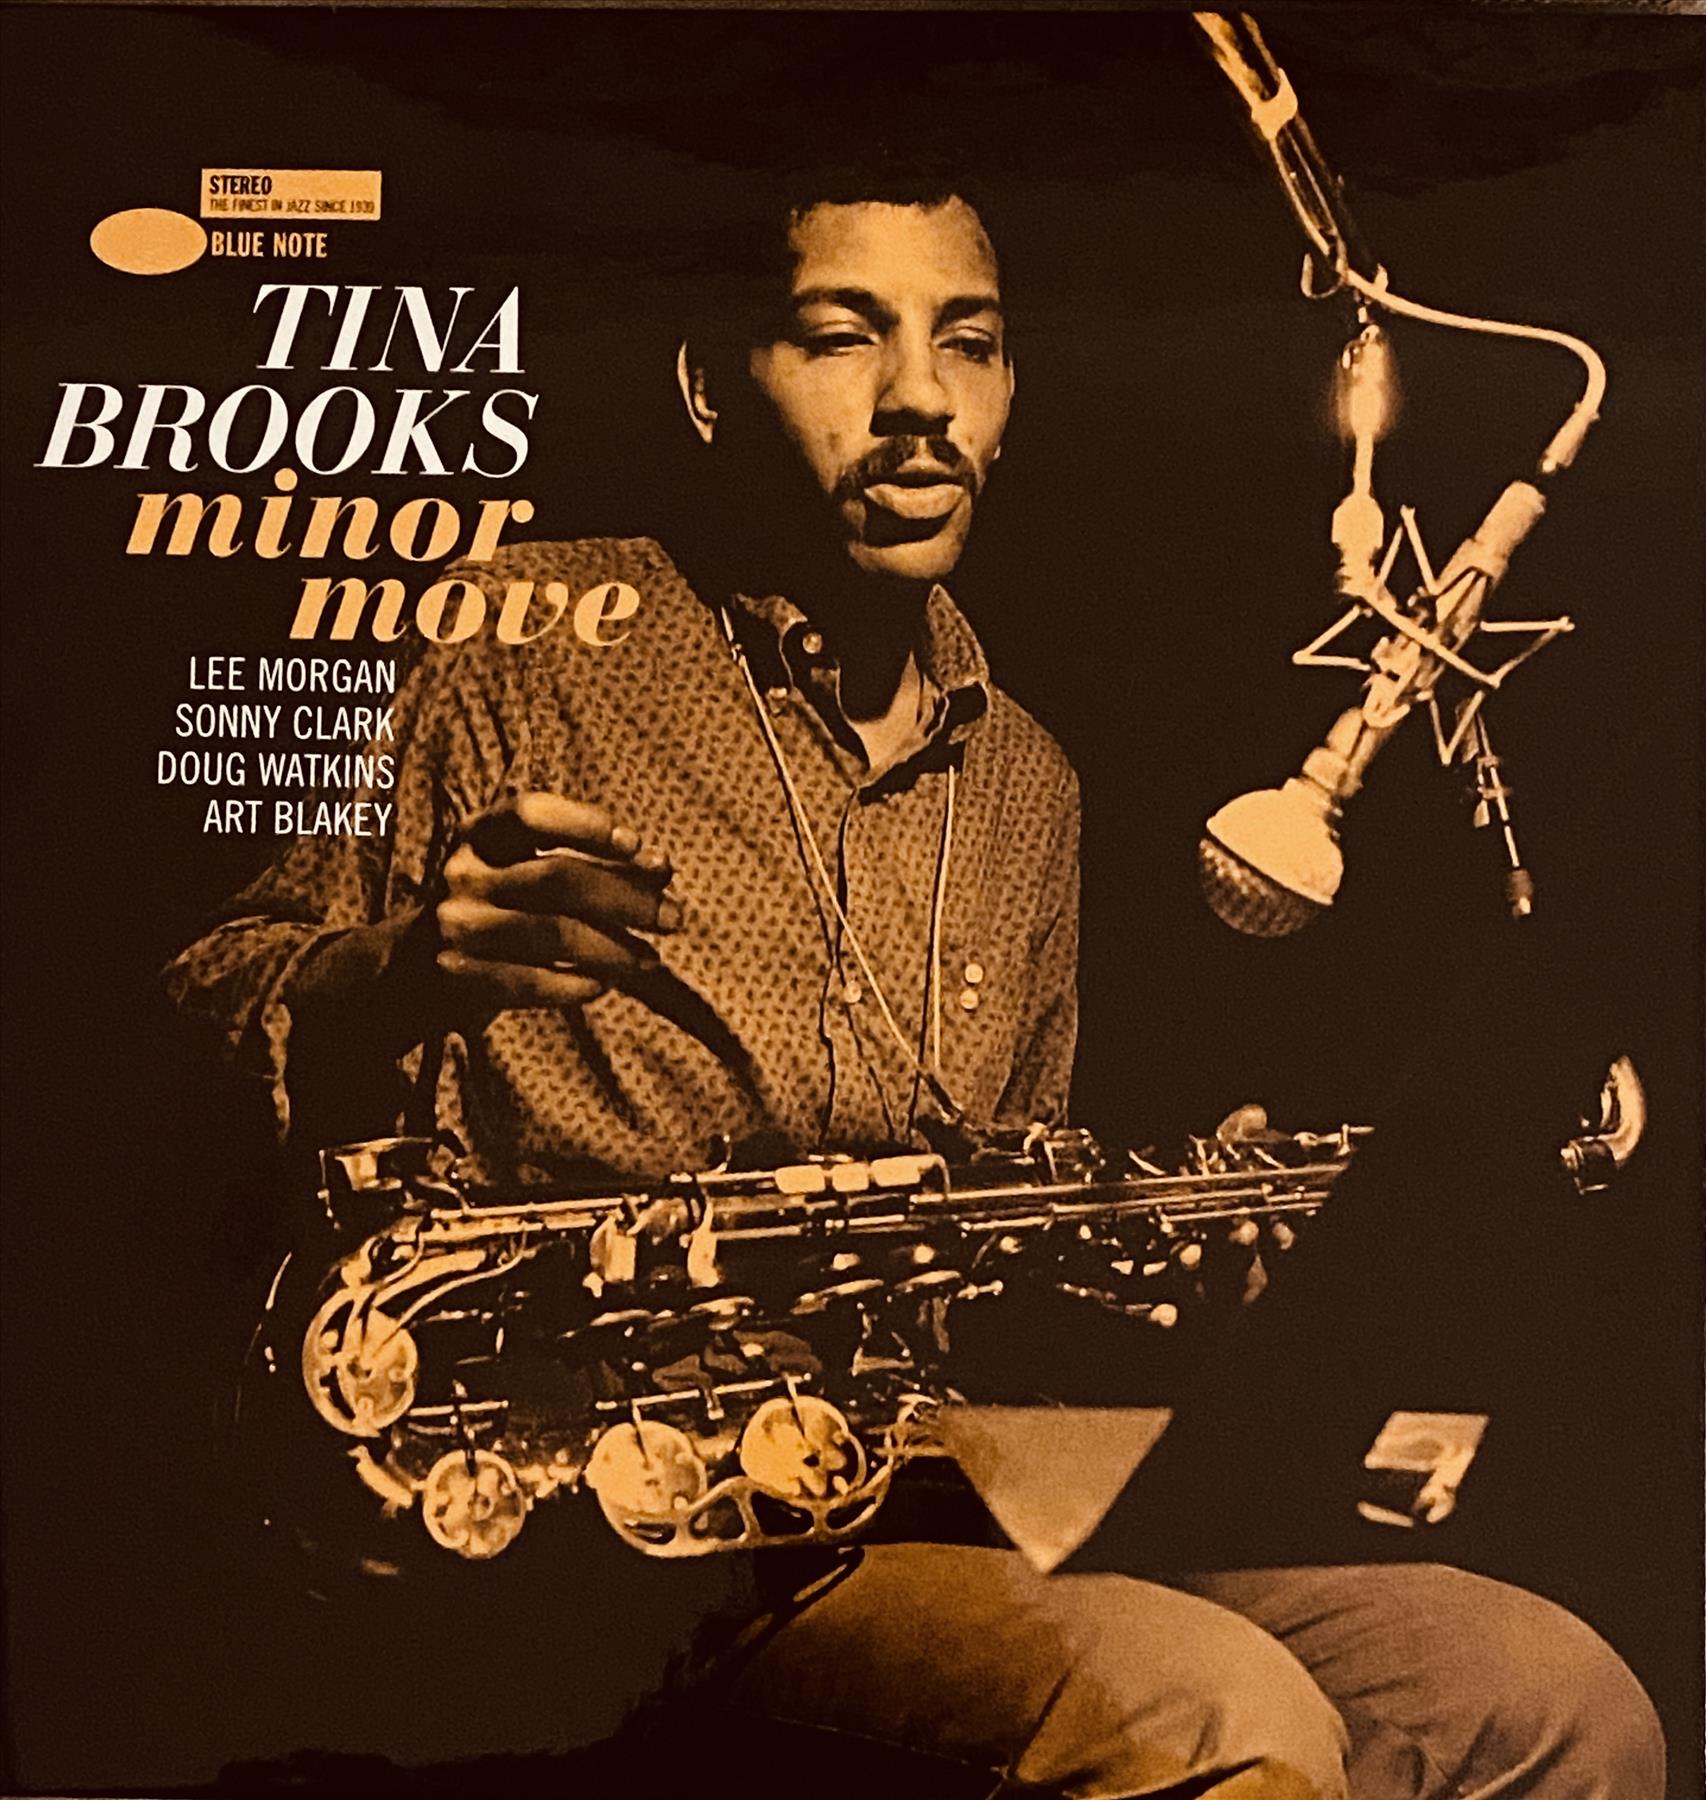 Tina Brooks: Forgotten tenor saxophonist in life, revered by connoisseurs in death.